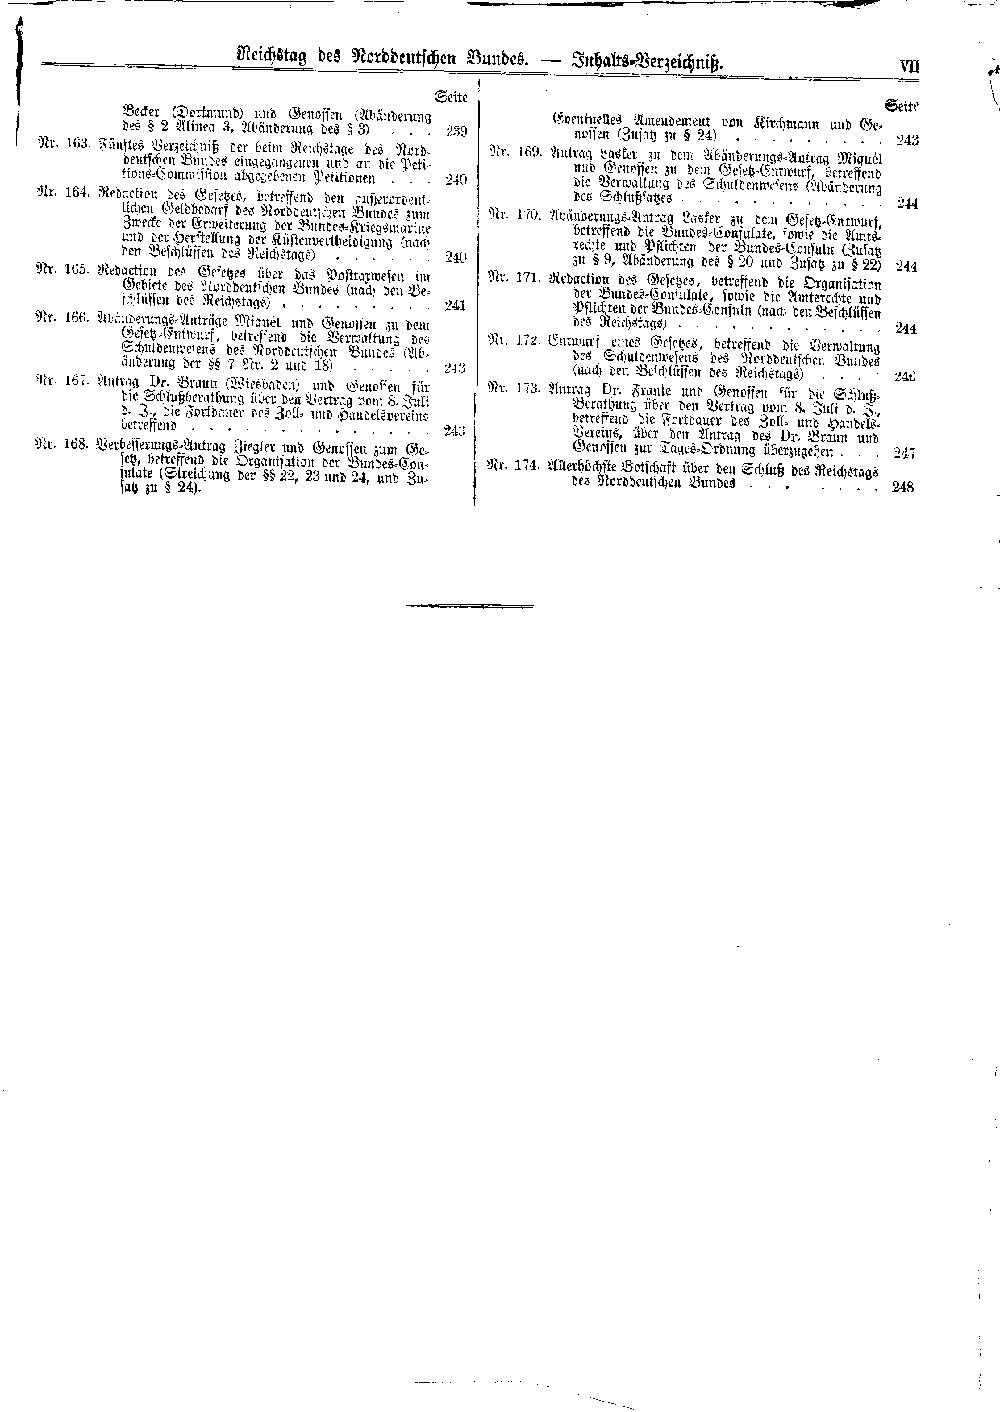 Scan of page VII